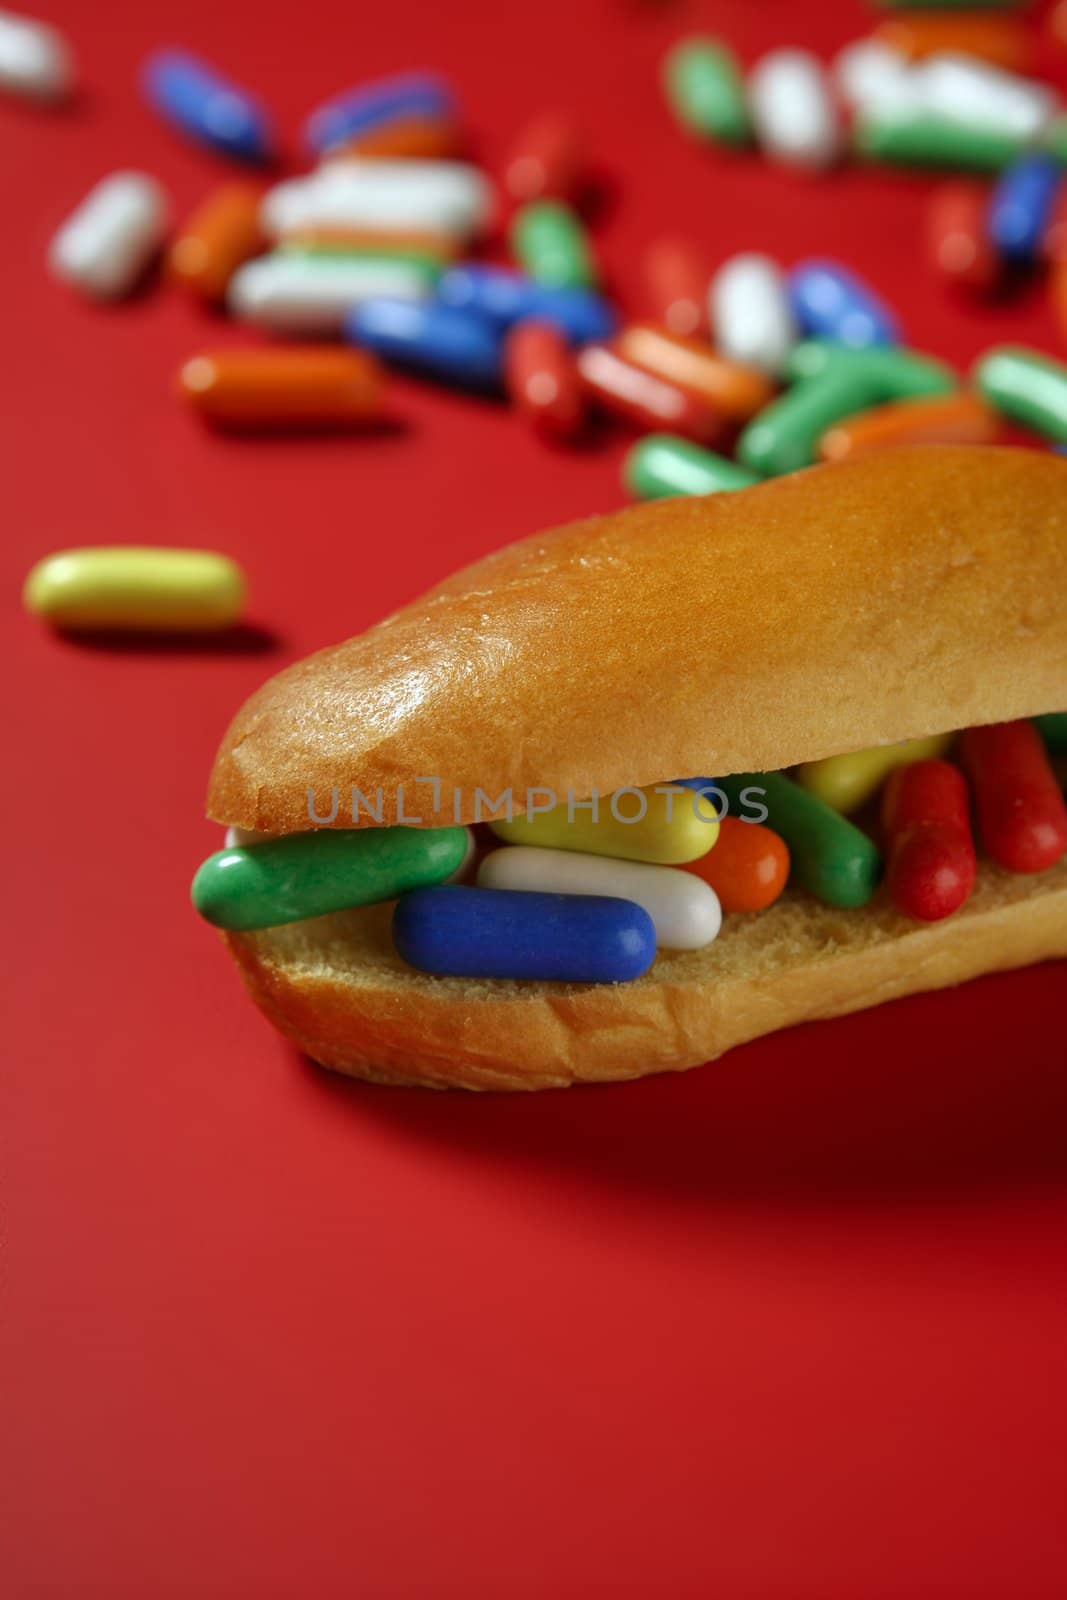 Candy sandwich sweet metaphor over red background